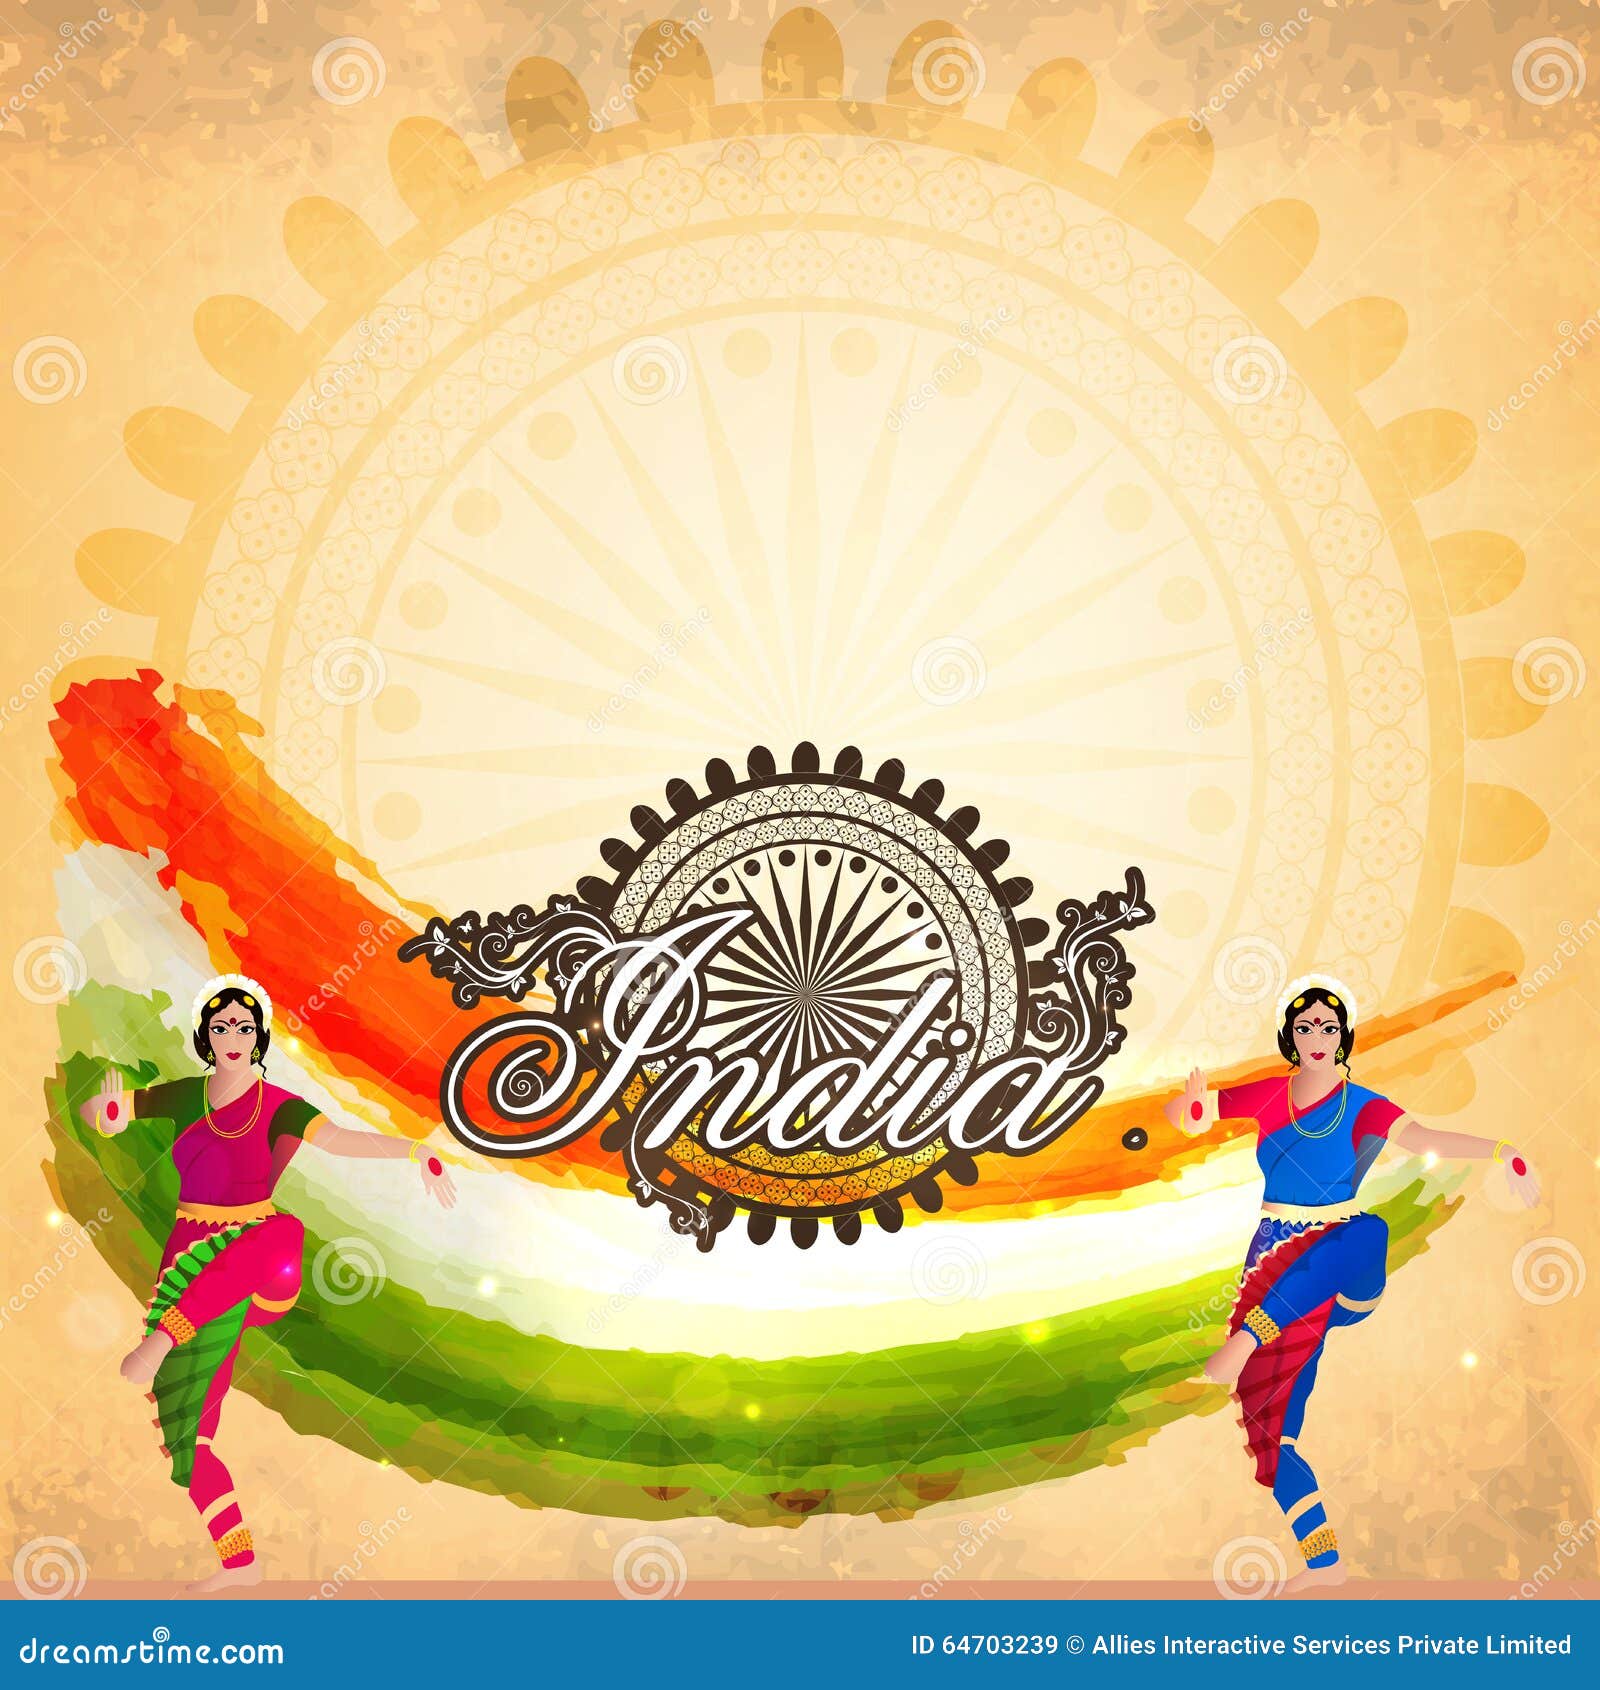 Indian Classical Dancers for Republic Day Celebration. Stock Illustration -  Illustration of equality, culture: 64703239